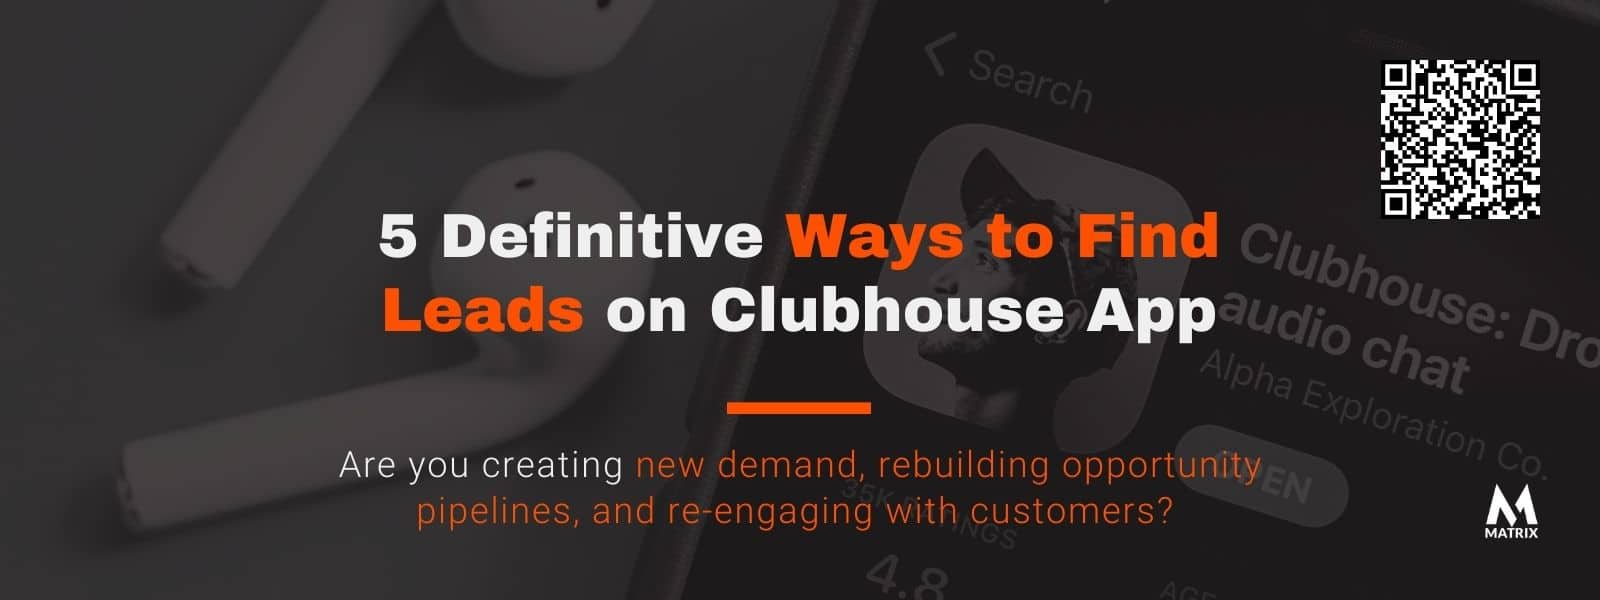 clubhouse app sales leads